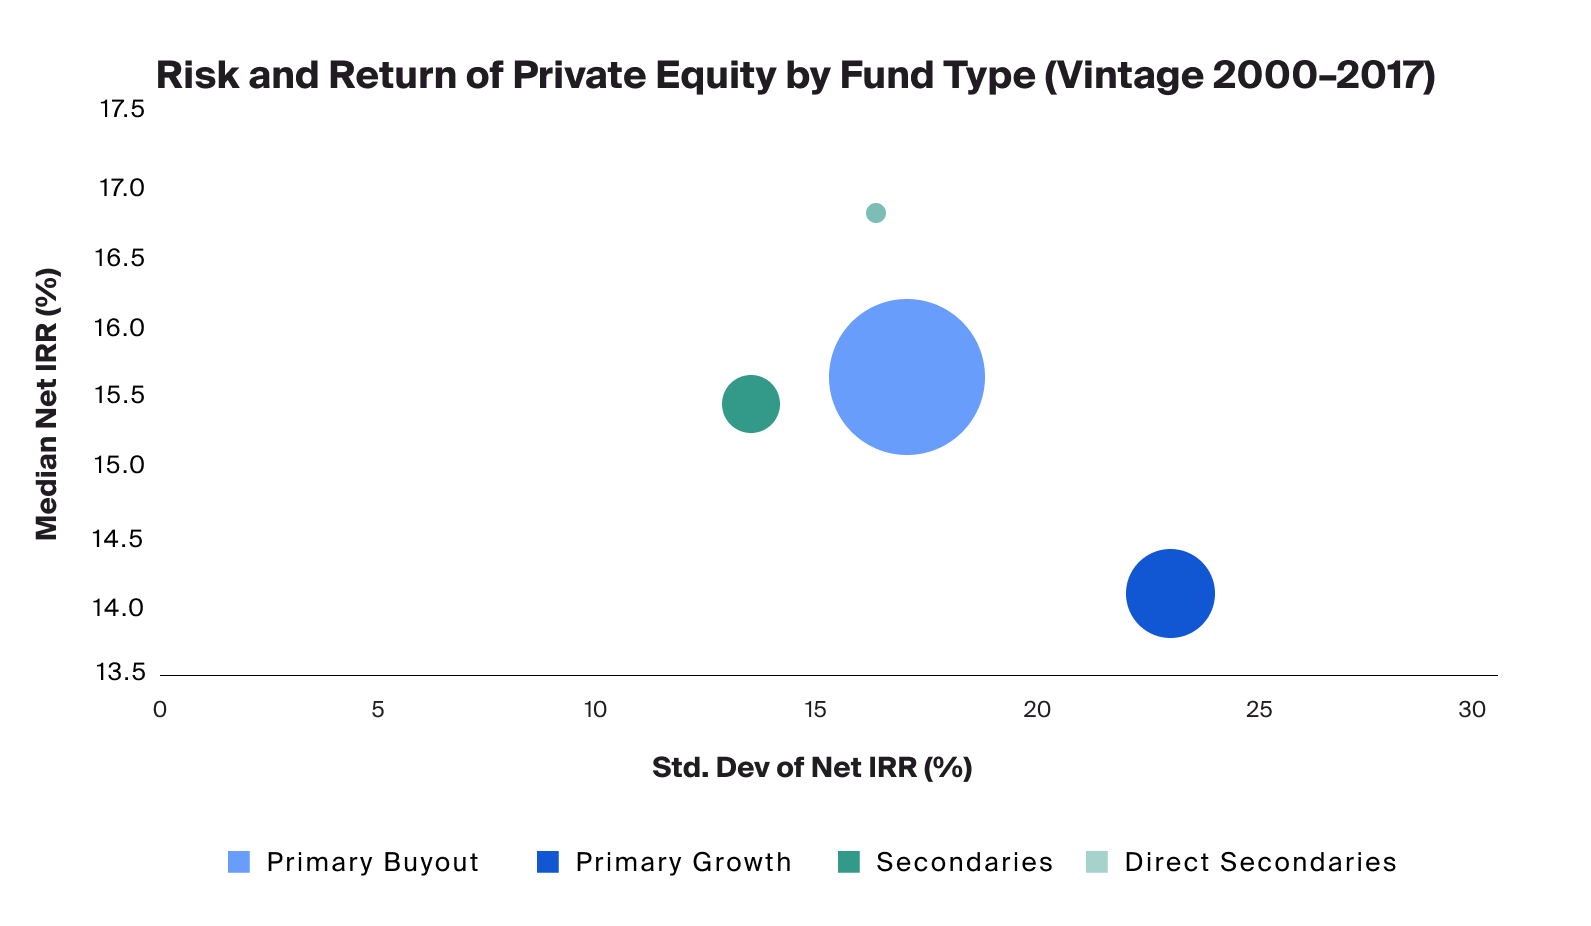 Exhibit 3: The risk and return profiles of secondaries tend to differ slightly from those of other PE fund types